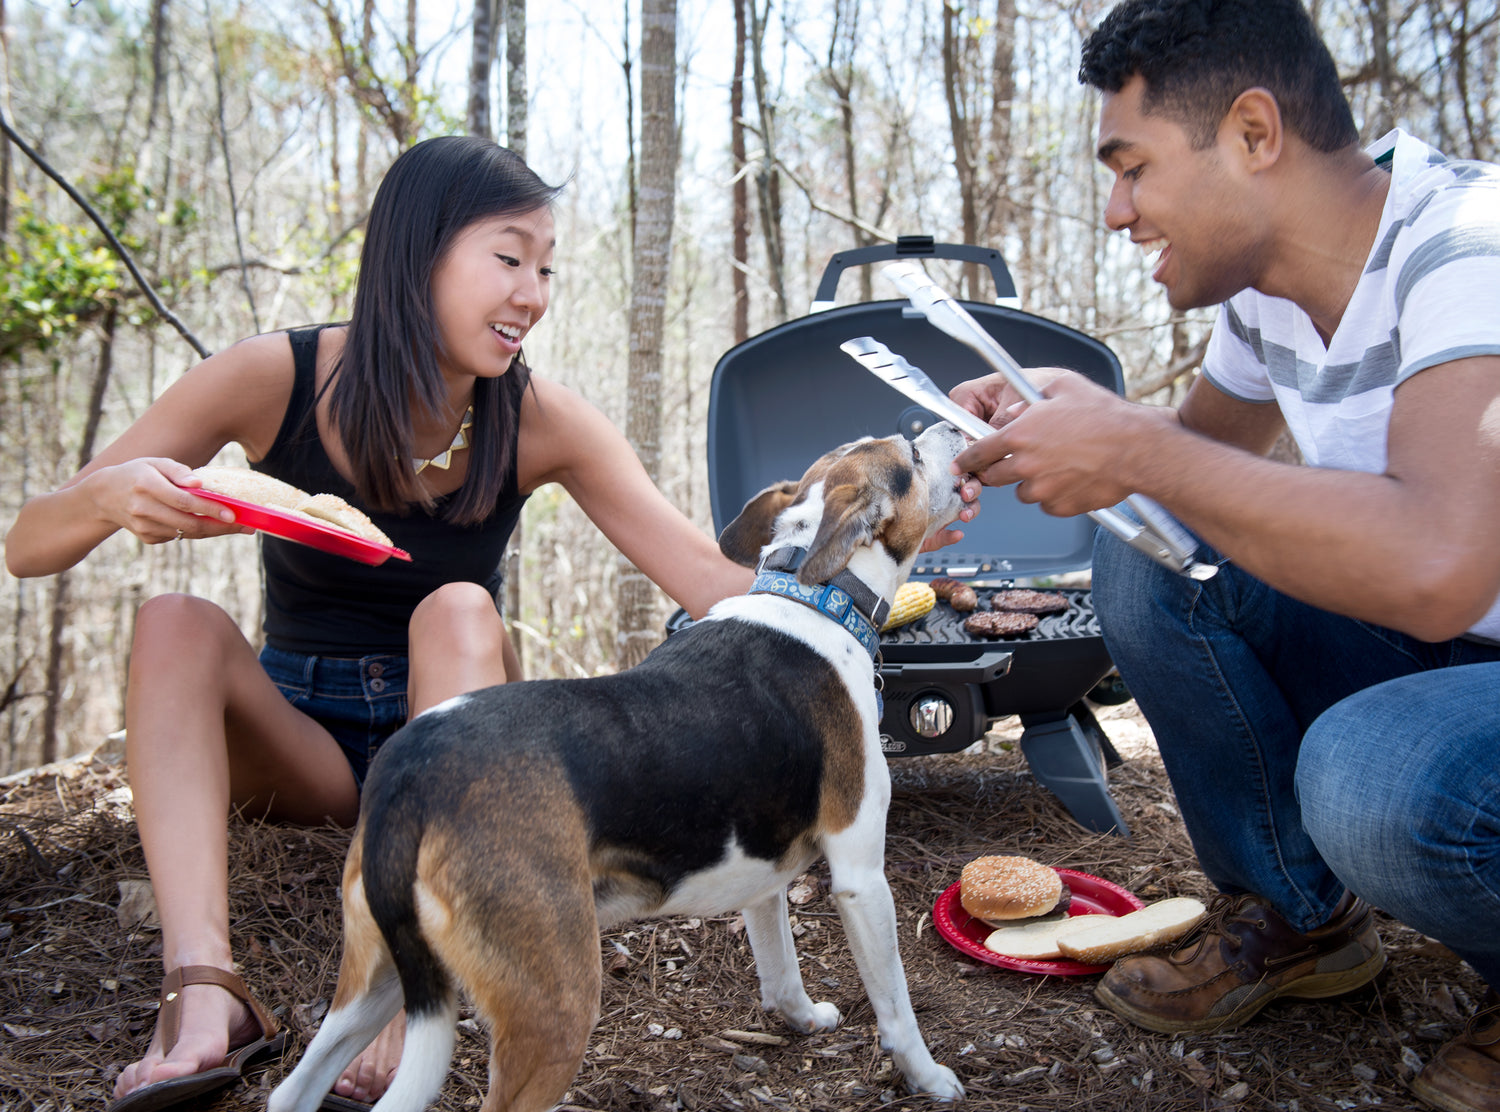 Napoleon Travel Q 285 Portable Grills Lifestyle Image with Couple and Dog